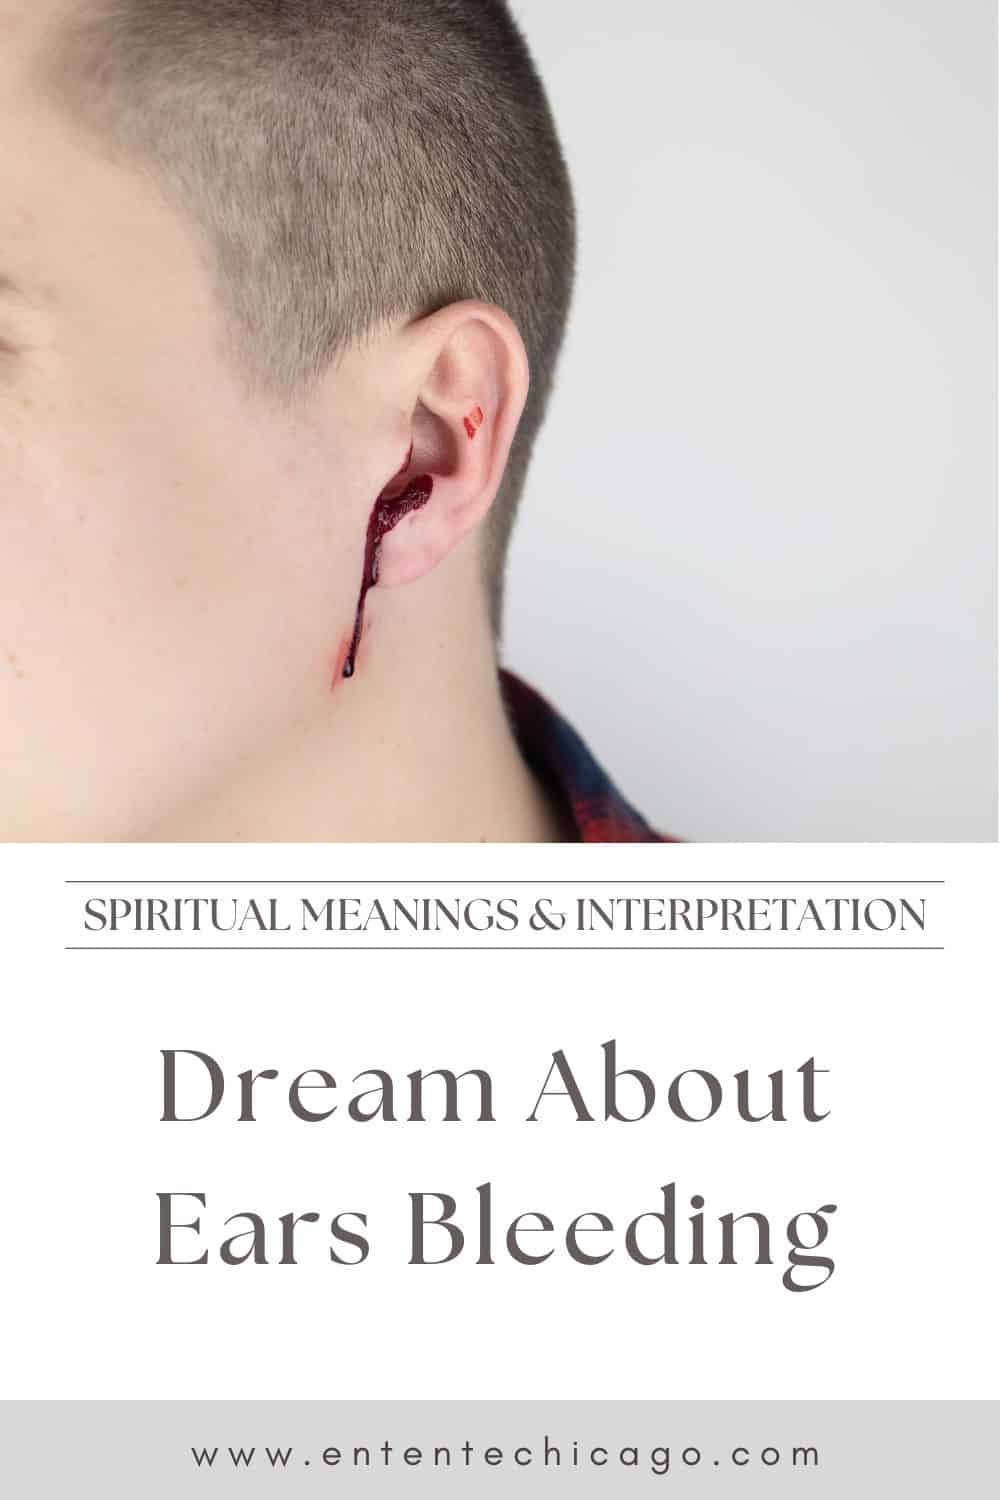 Detailed Meanings and Interpretations of Dreams About Ears Bleeding